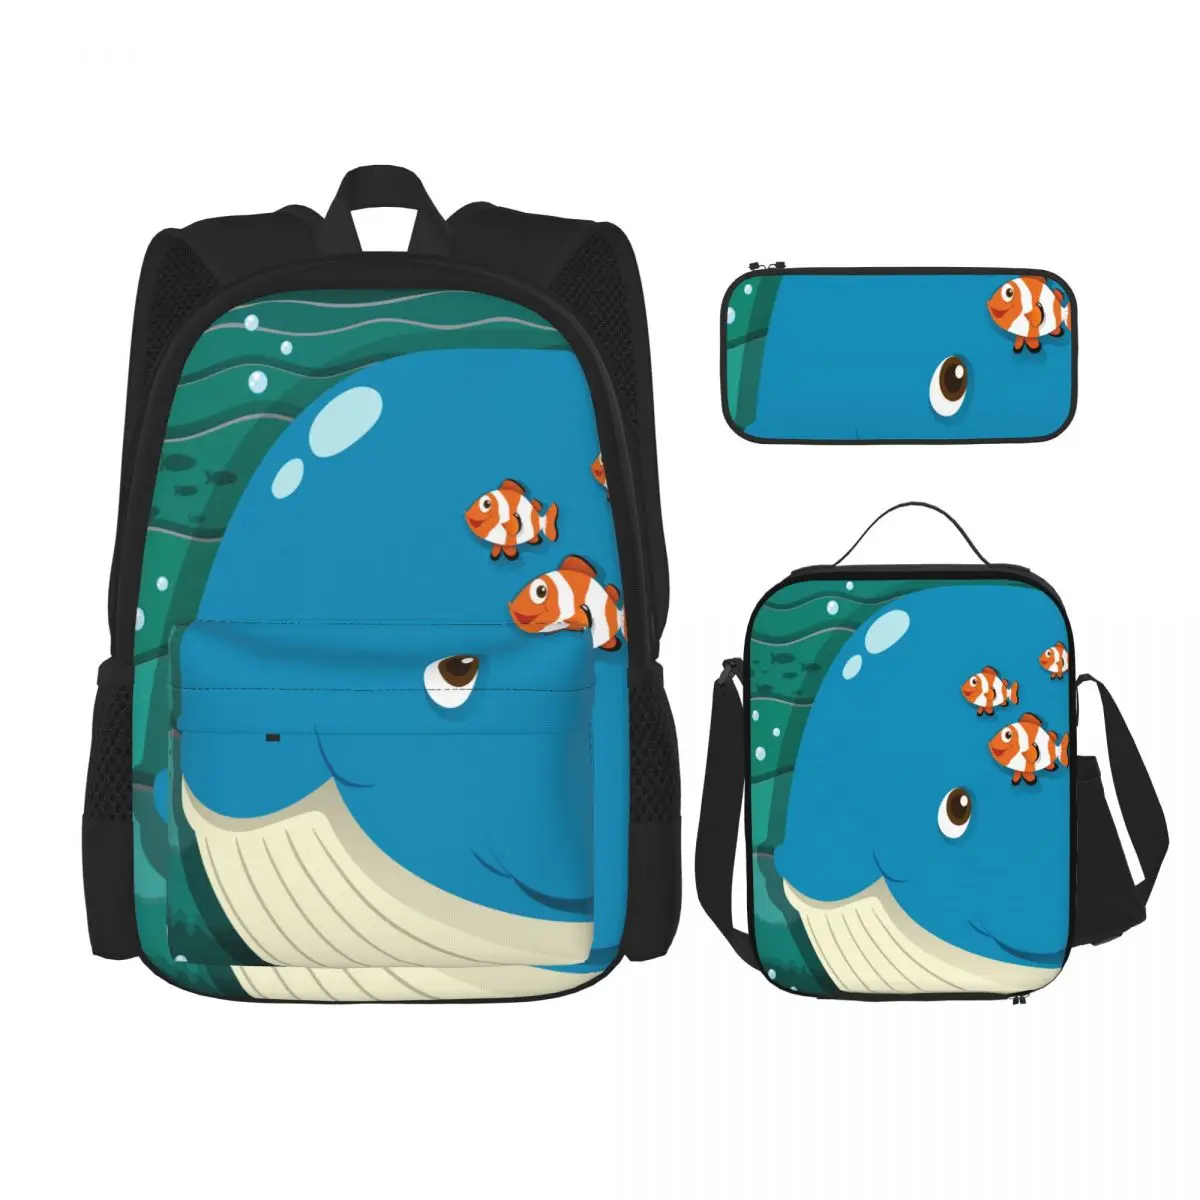 

3PCS School Backpack Set Whale Clownfish Swimming Bag Casual Student Backpacks School Bags for Teenagers Boys Girls